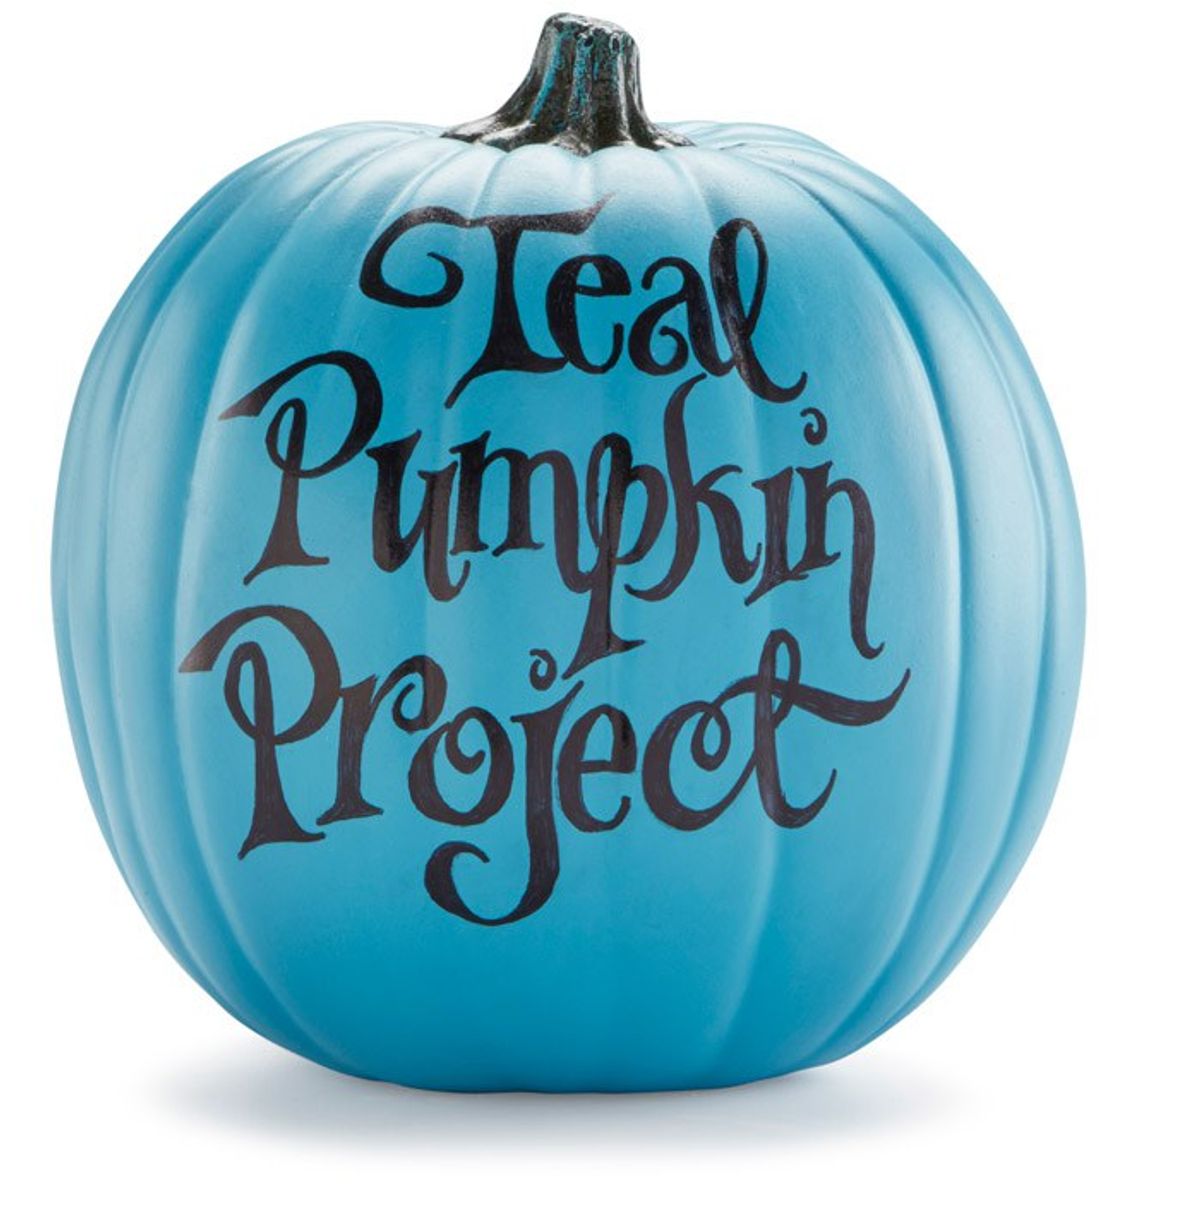 What is the Teal Pumpkin Project?